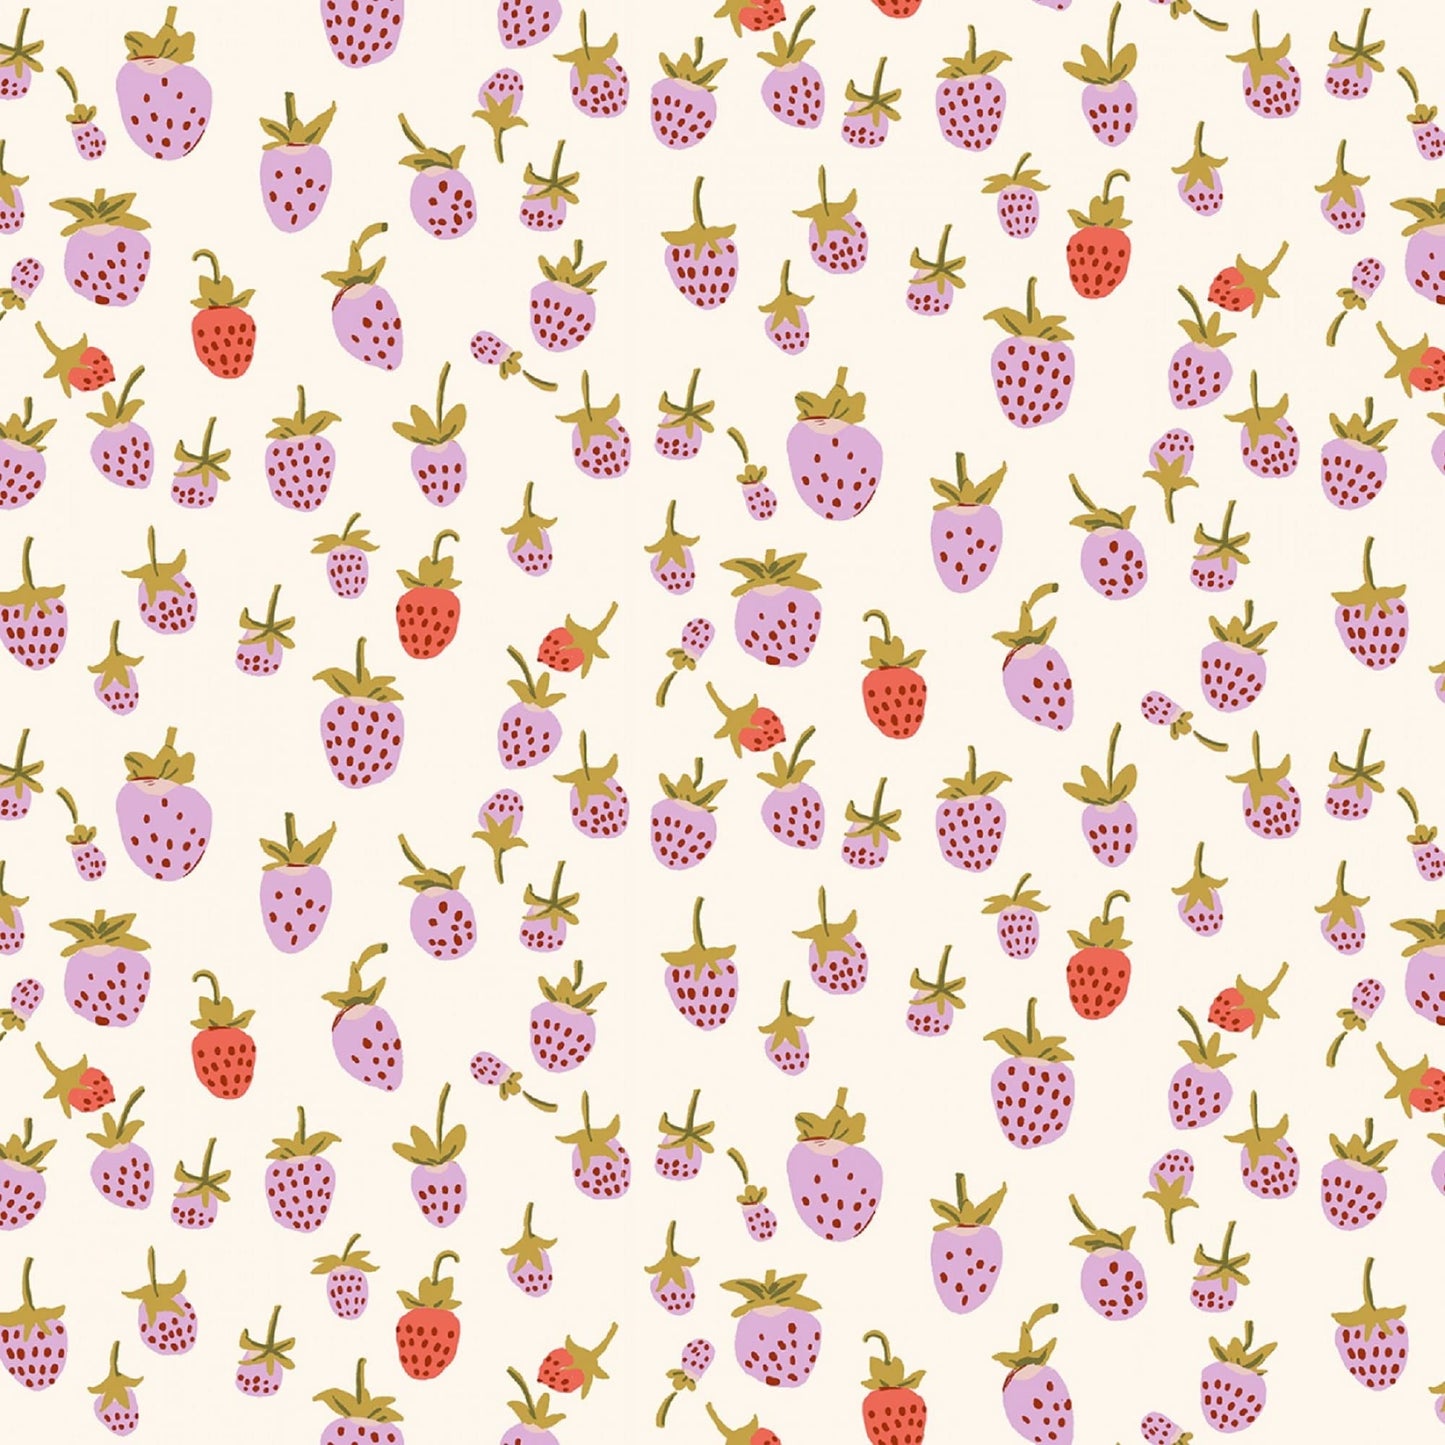 Strawberry Lilac 108" WIDEBACK - Heather Ross - Windham Fabrics - Quilters Cotton Quilt Backing